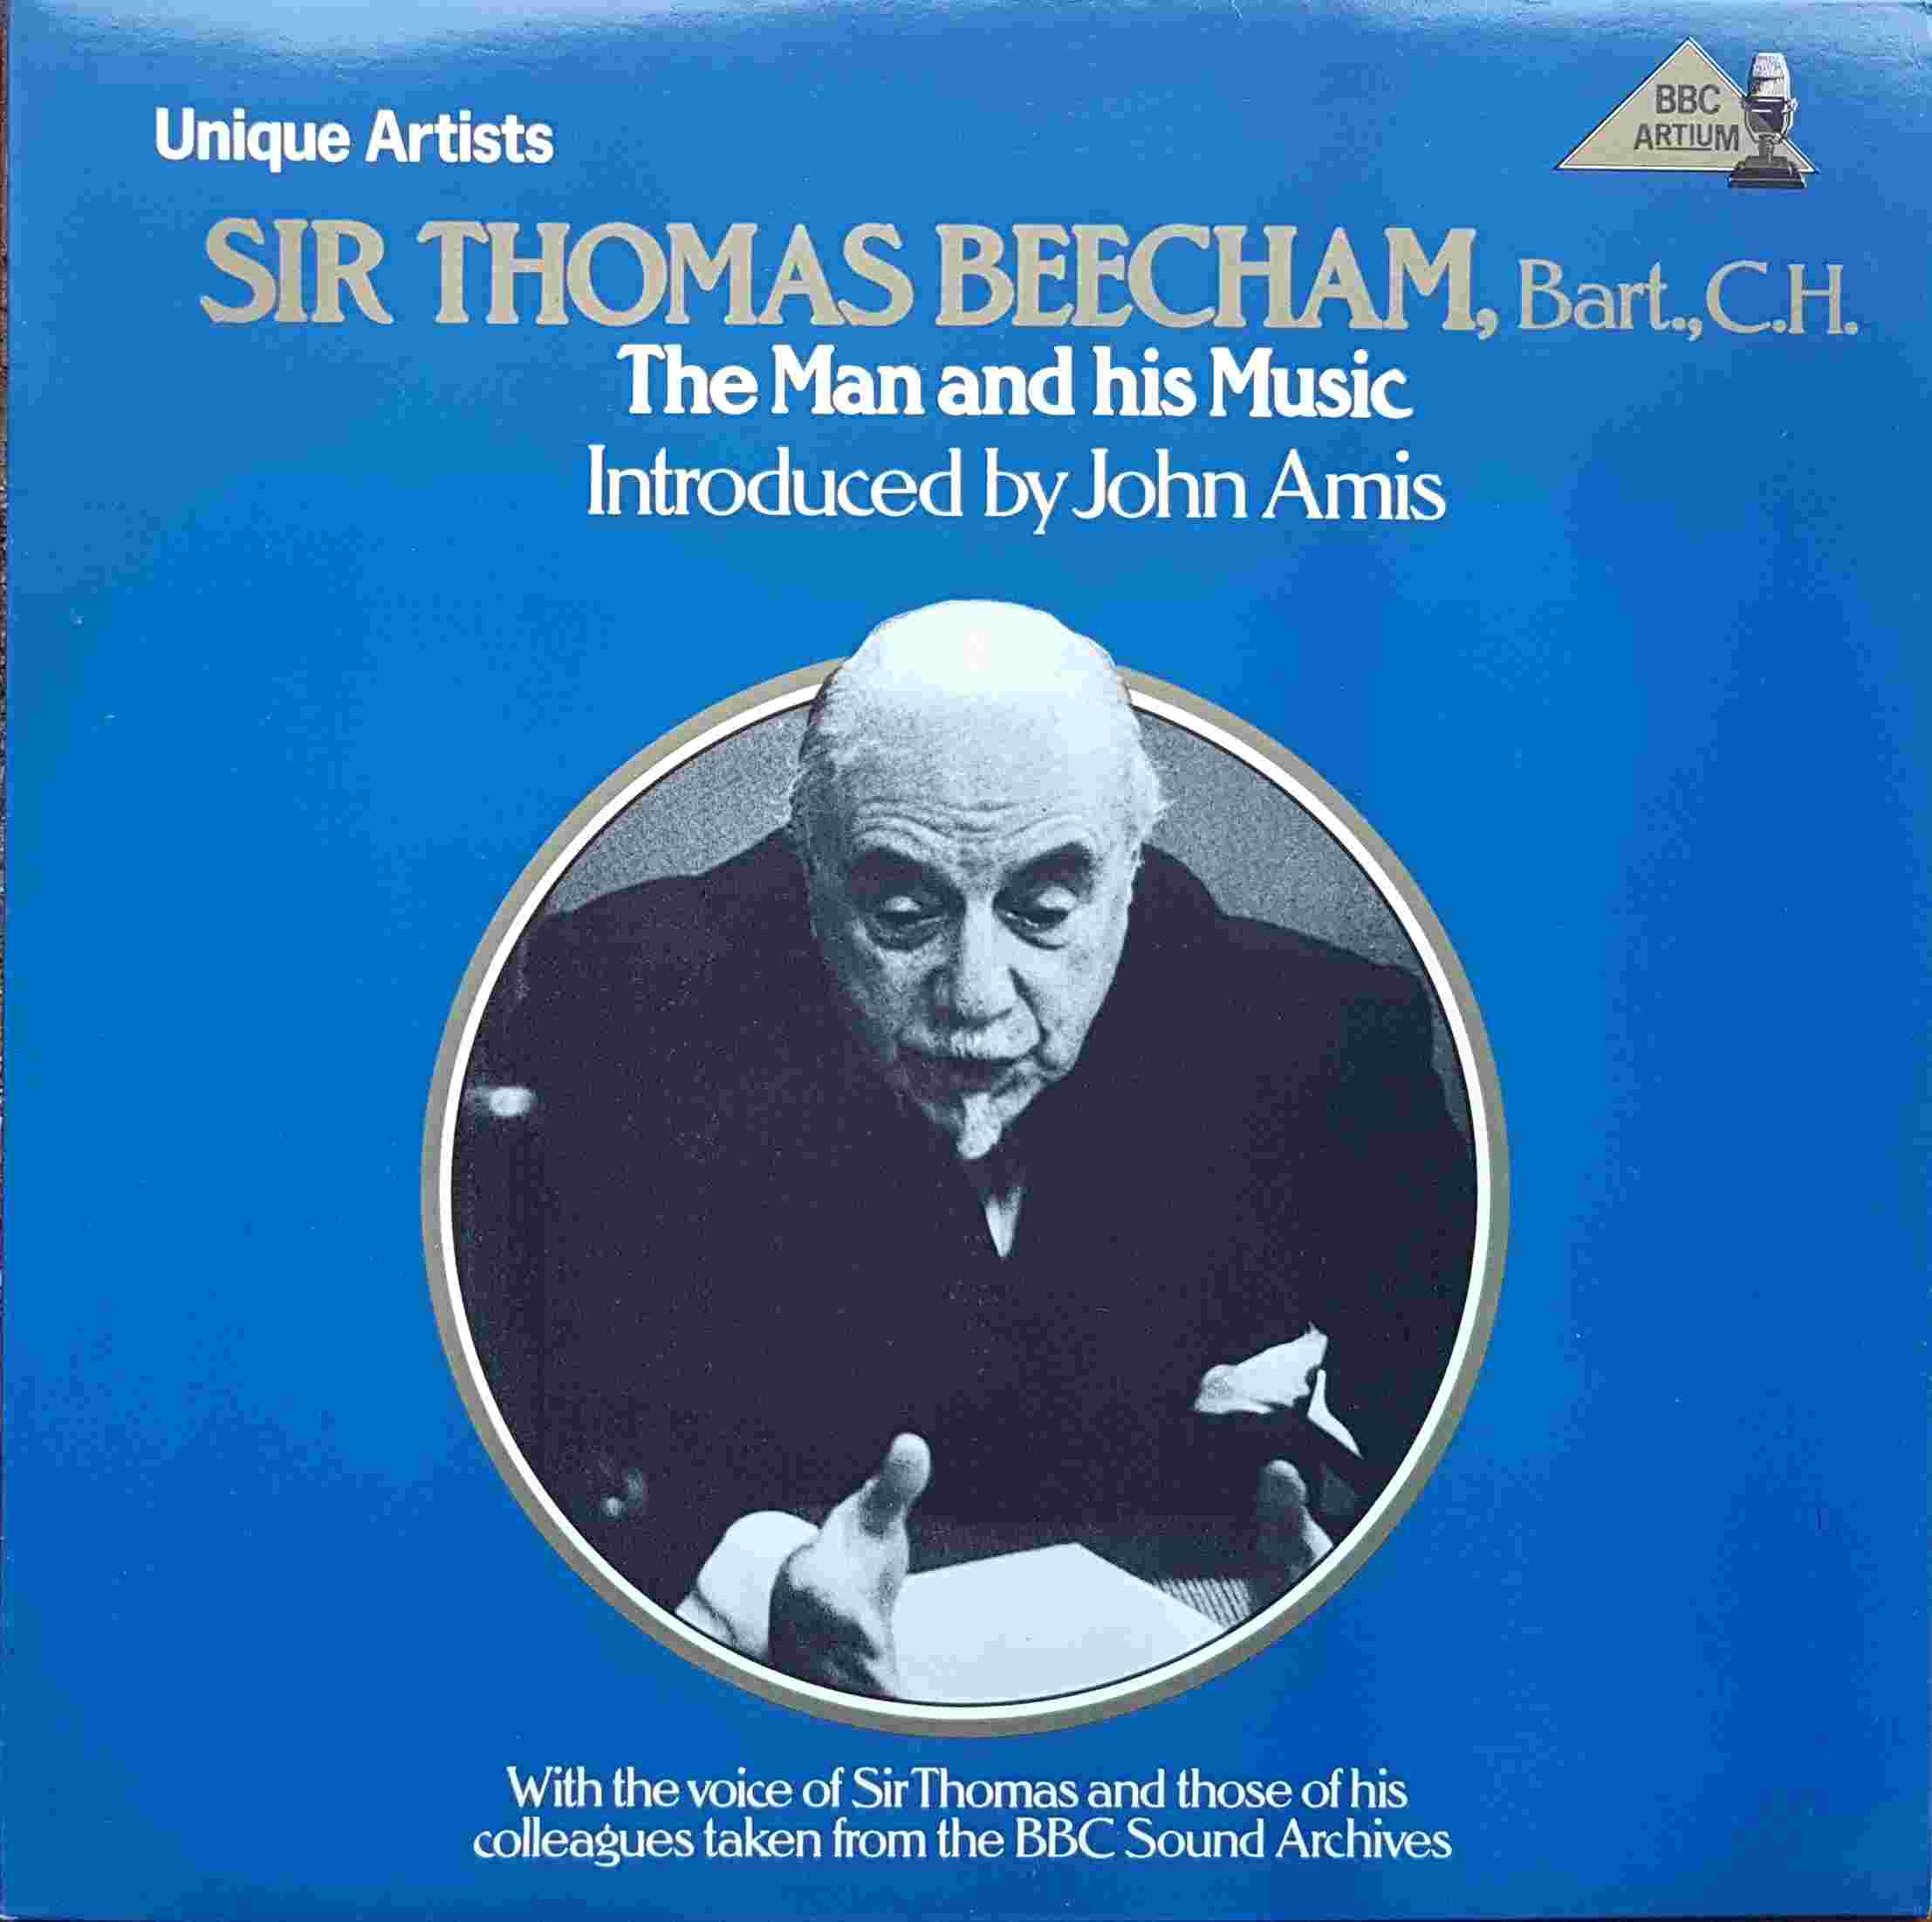 Picture of REGL 350 Sir Thomas Beecham by artist Sir Thomas Beecham from the BBC albums - Records and Tapes library